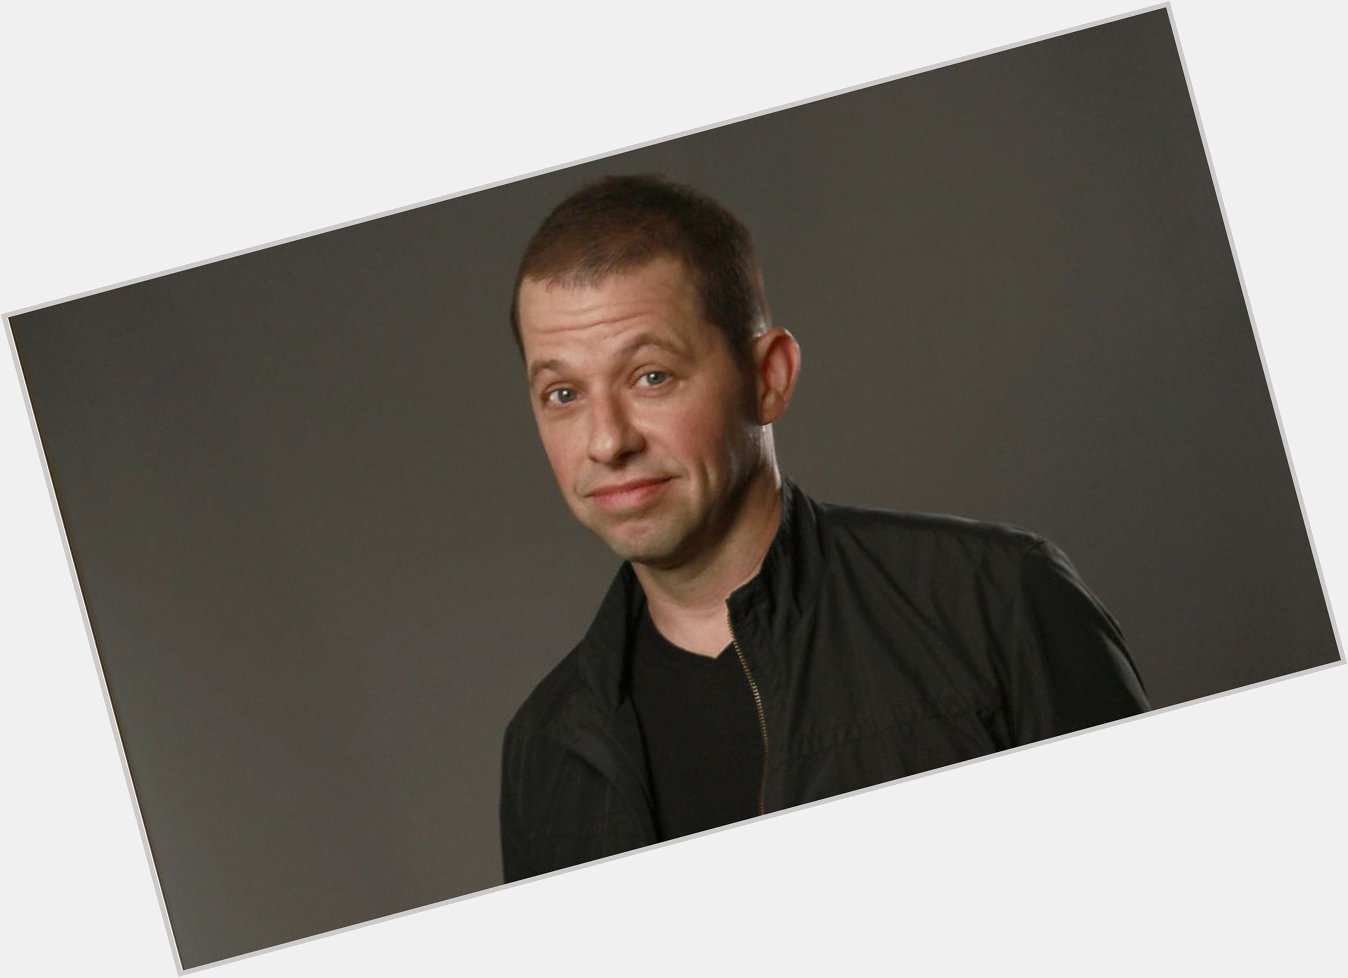 Happy birthday to actor Jon Cryer, who is 53 today  